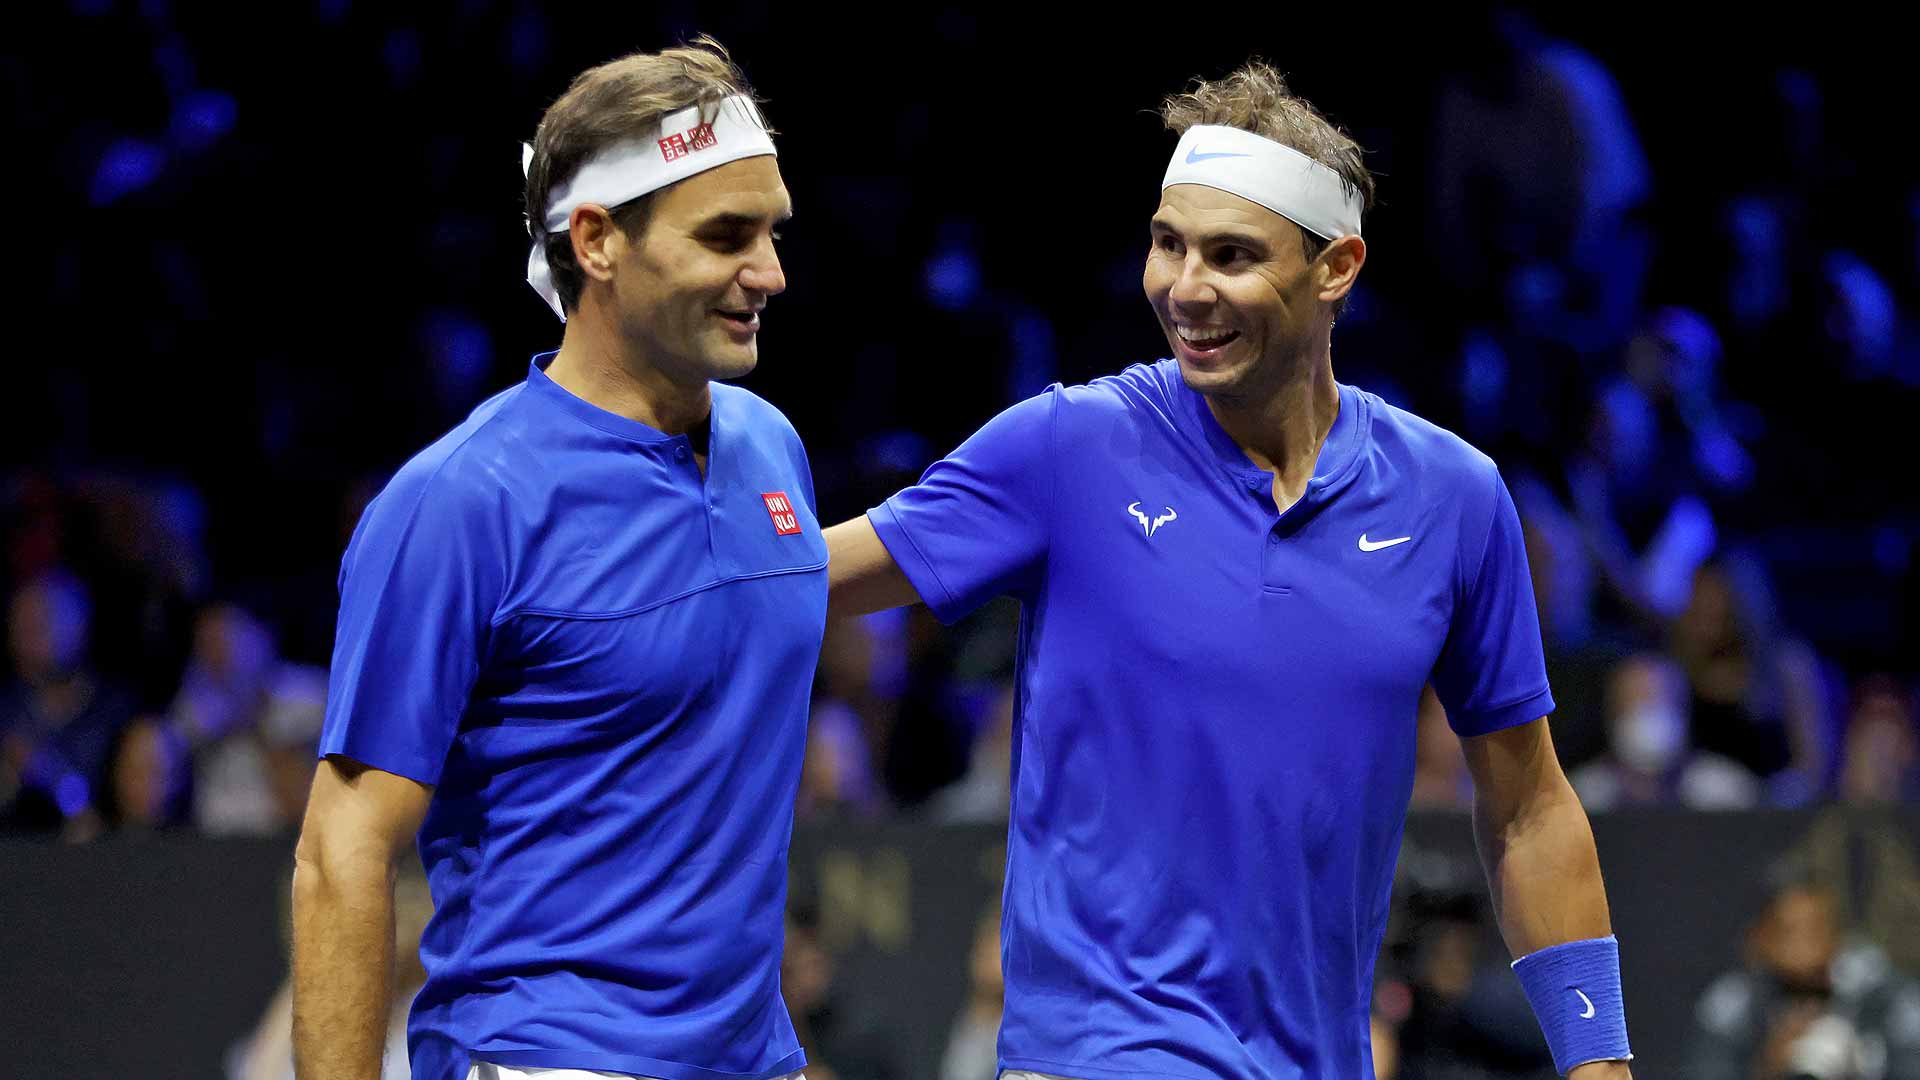 Roger Federer and Rafael Nadal were among the players who congratulated Argentina on its World Cup win.